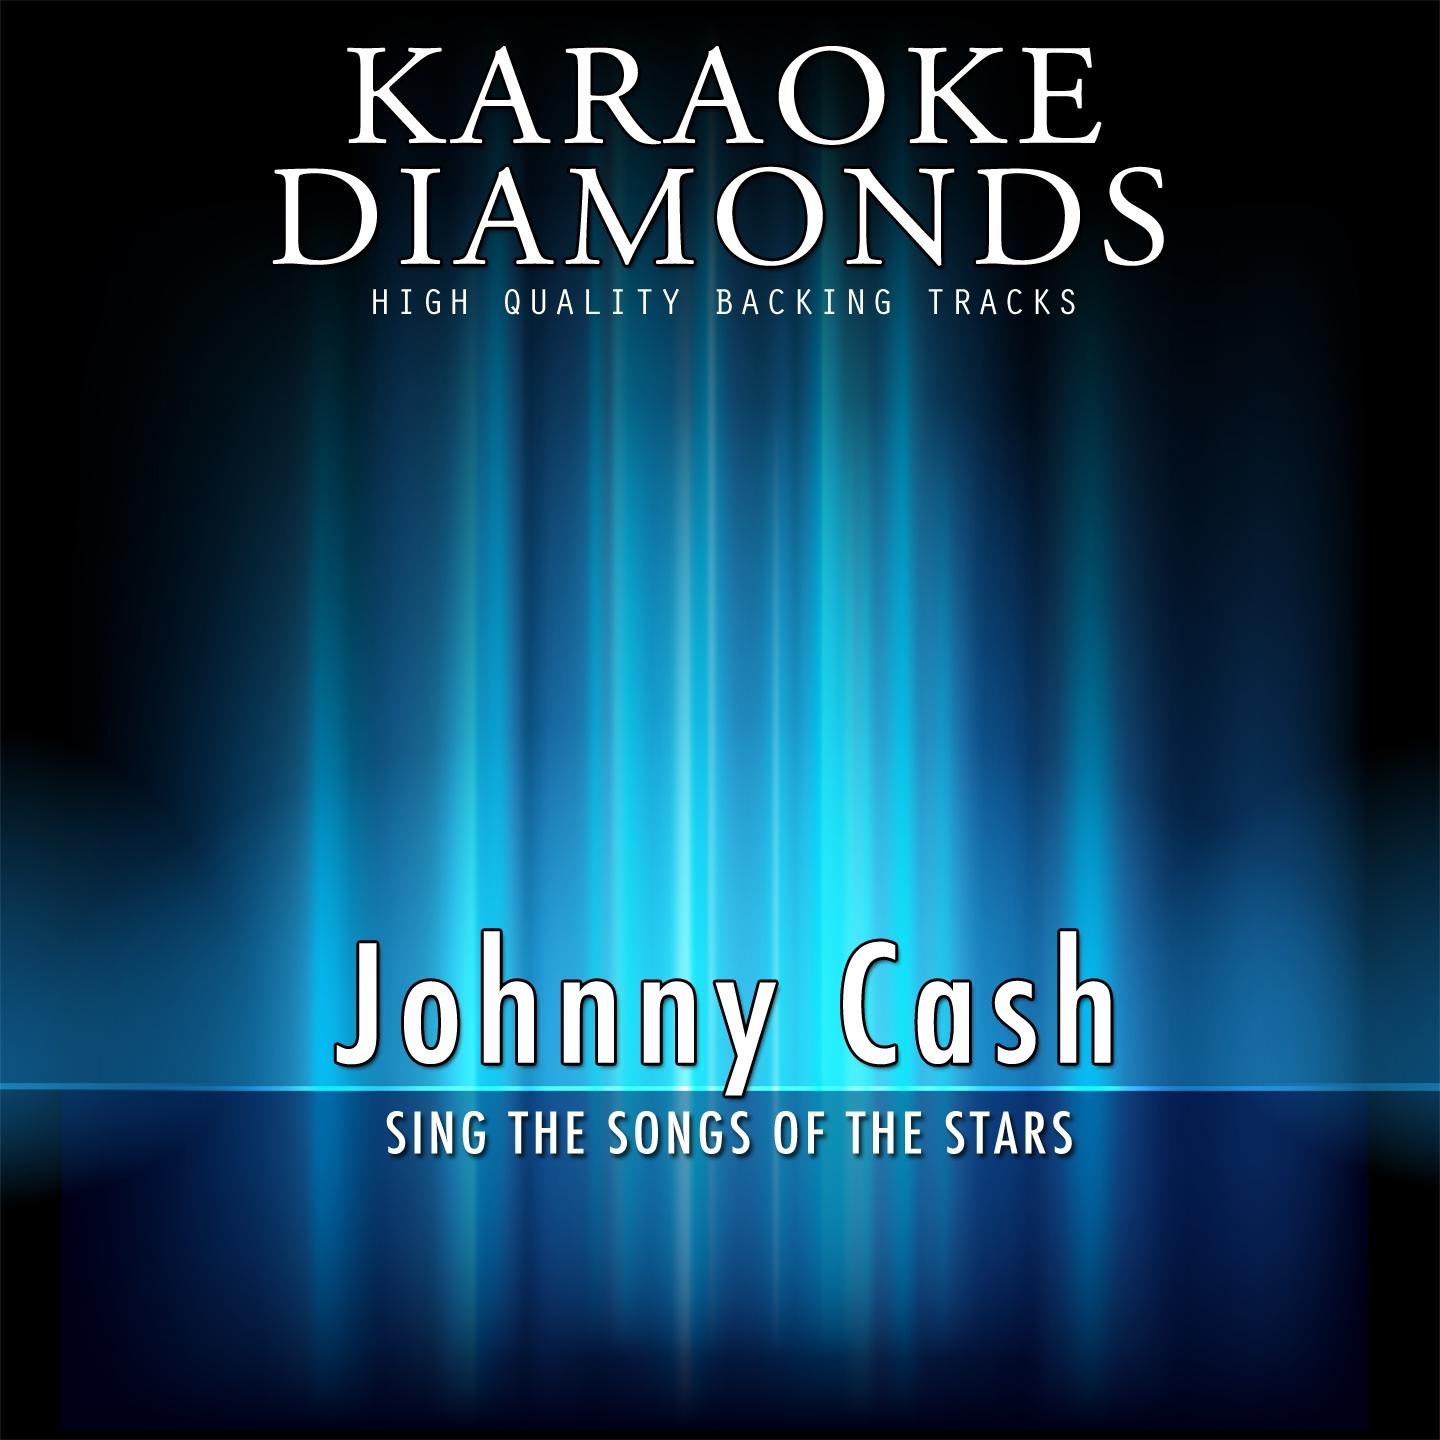 One Piece At a Time (Originally Performed By Johnny Cash)